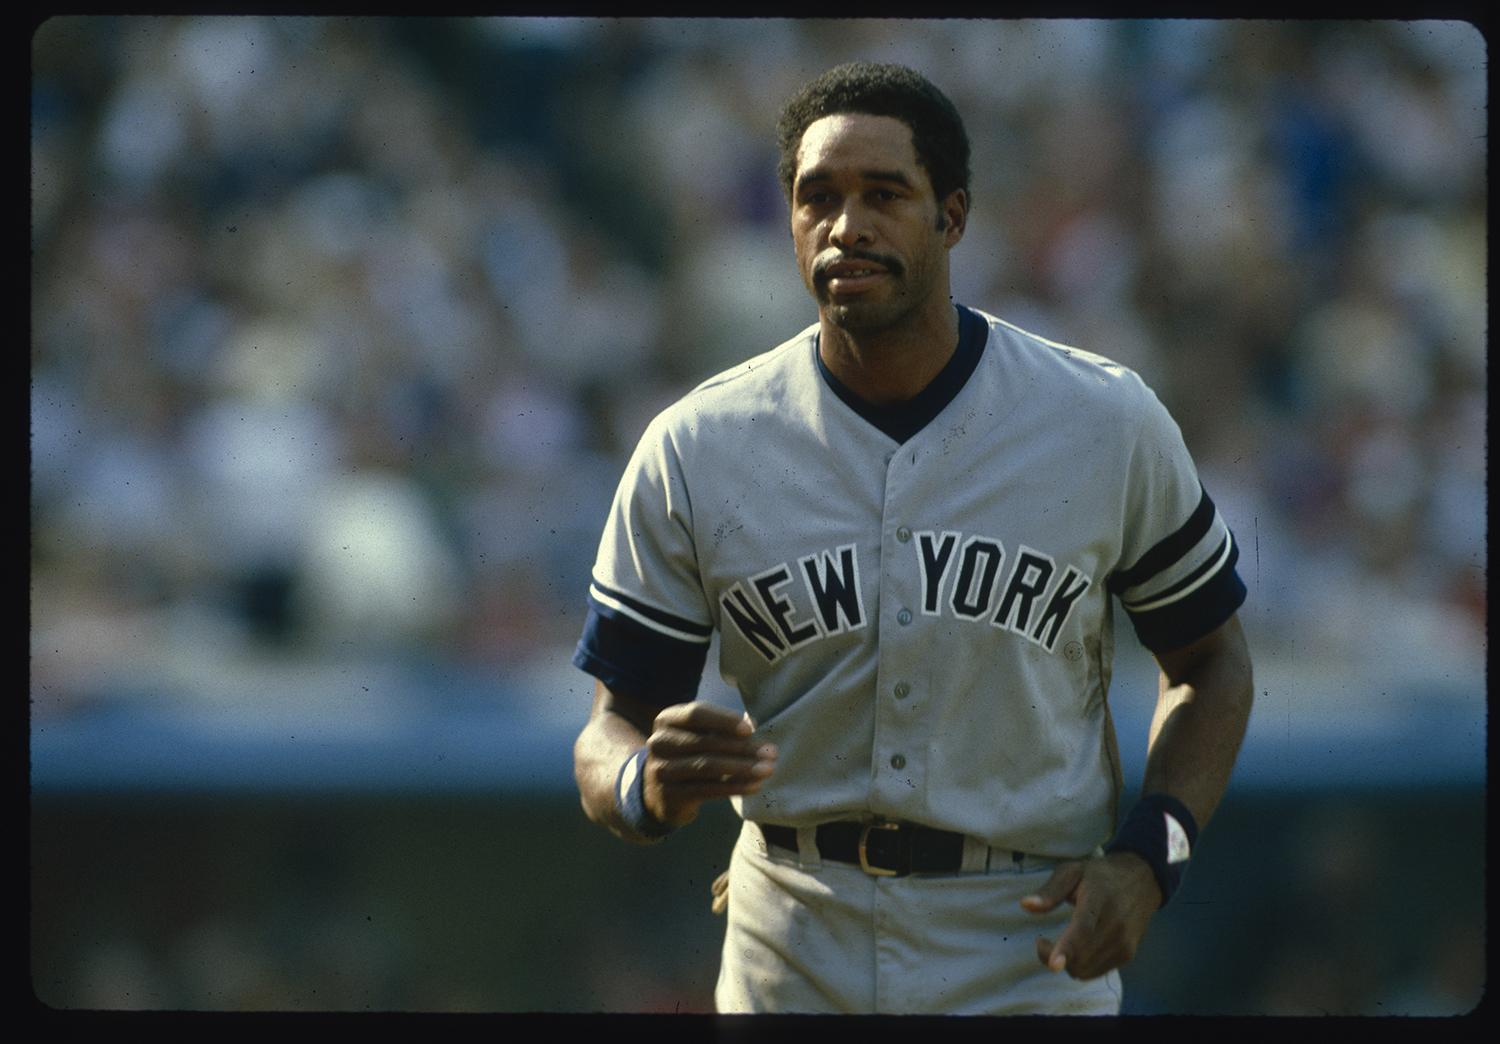 Dave Winfield continues to deliver off the baseball diamond